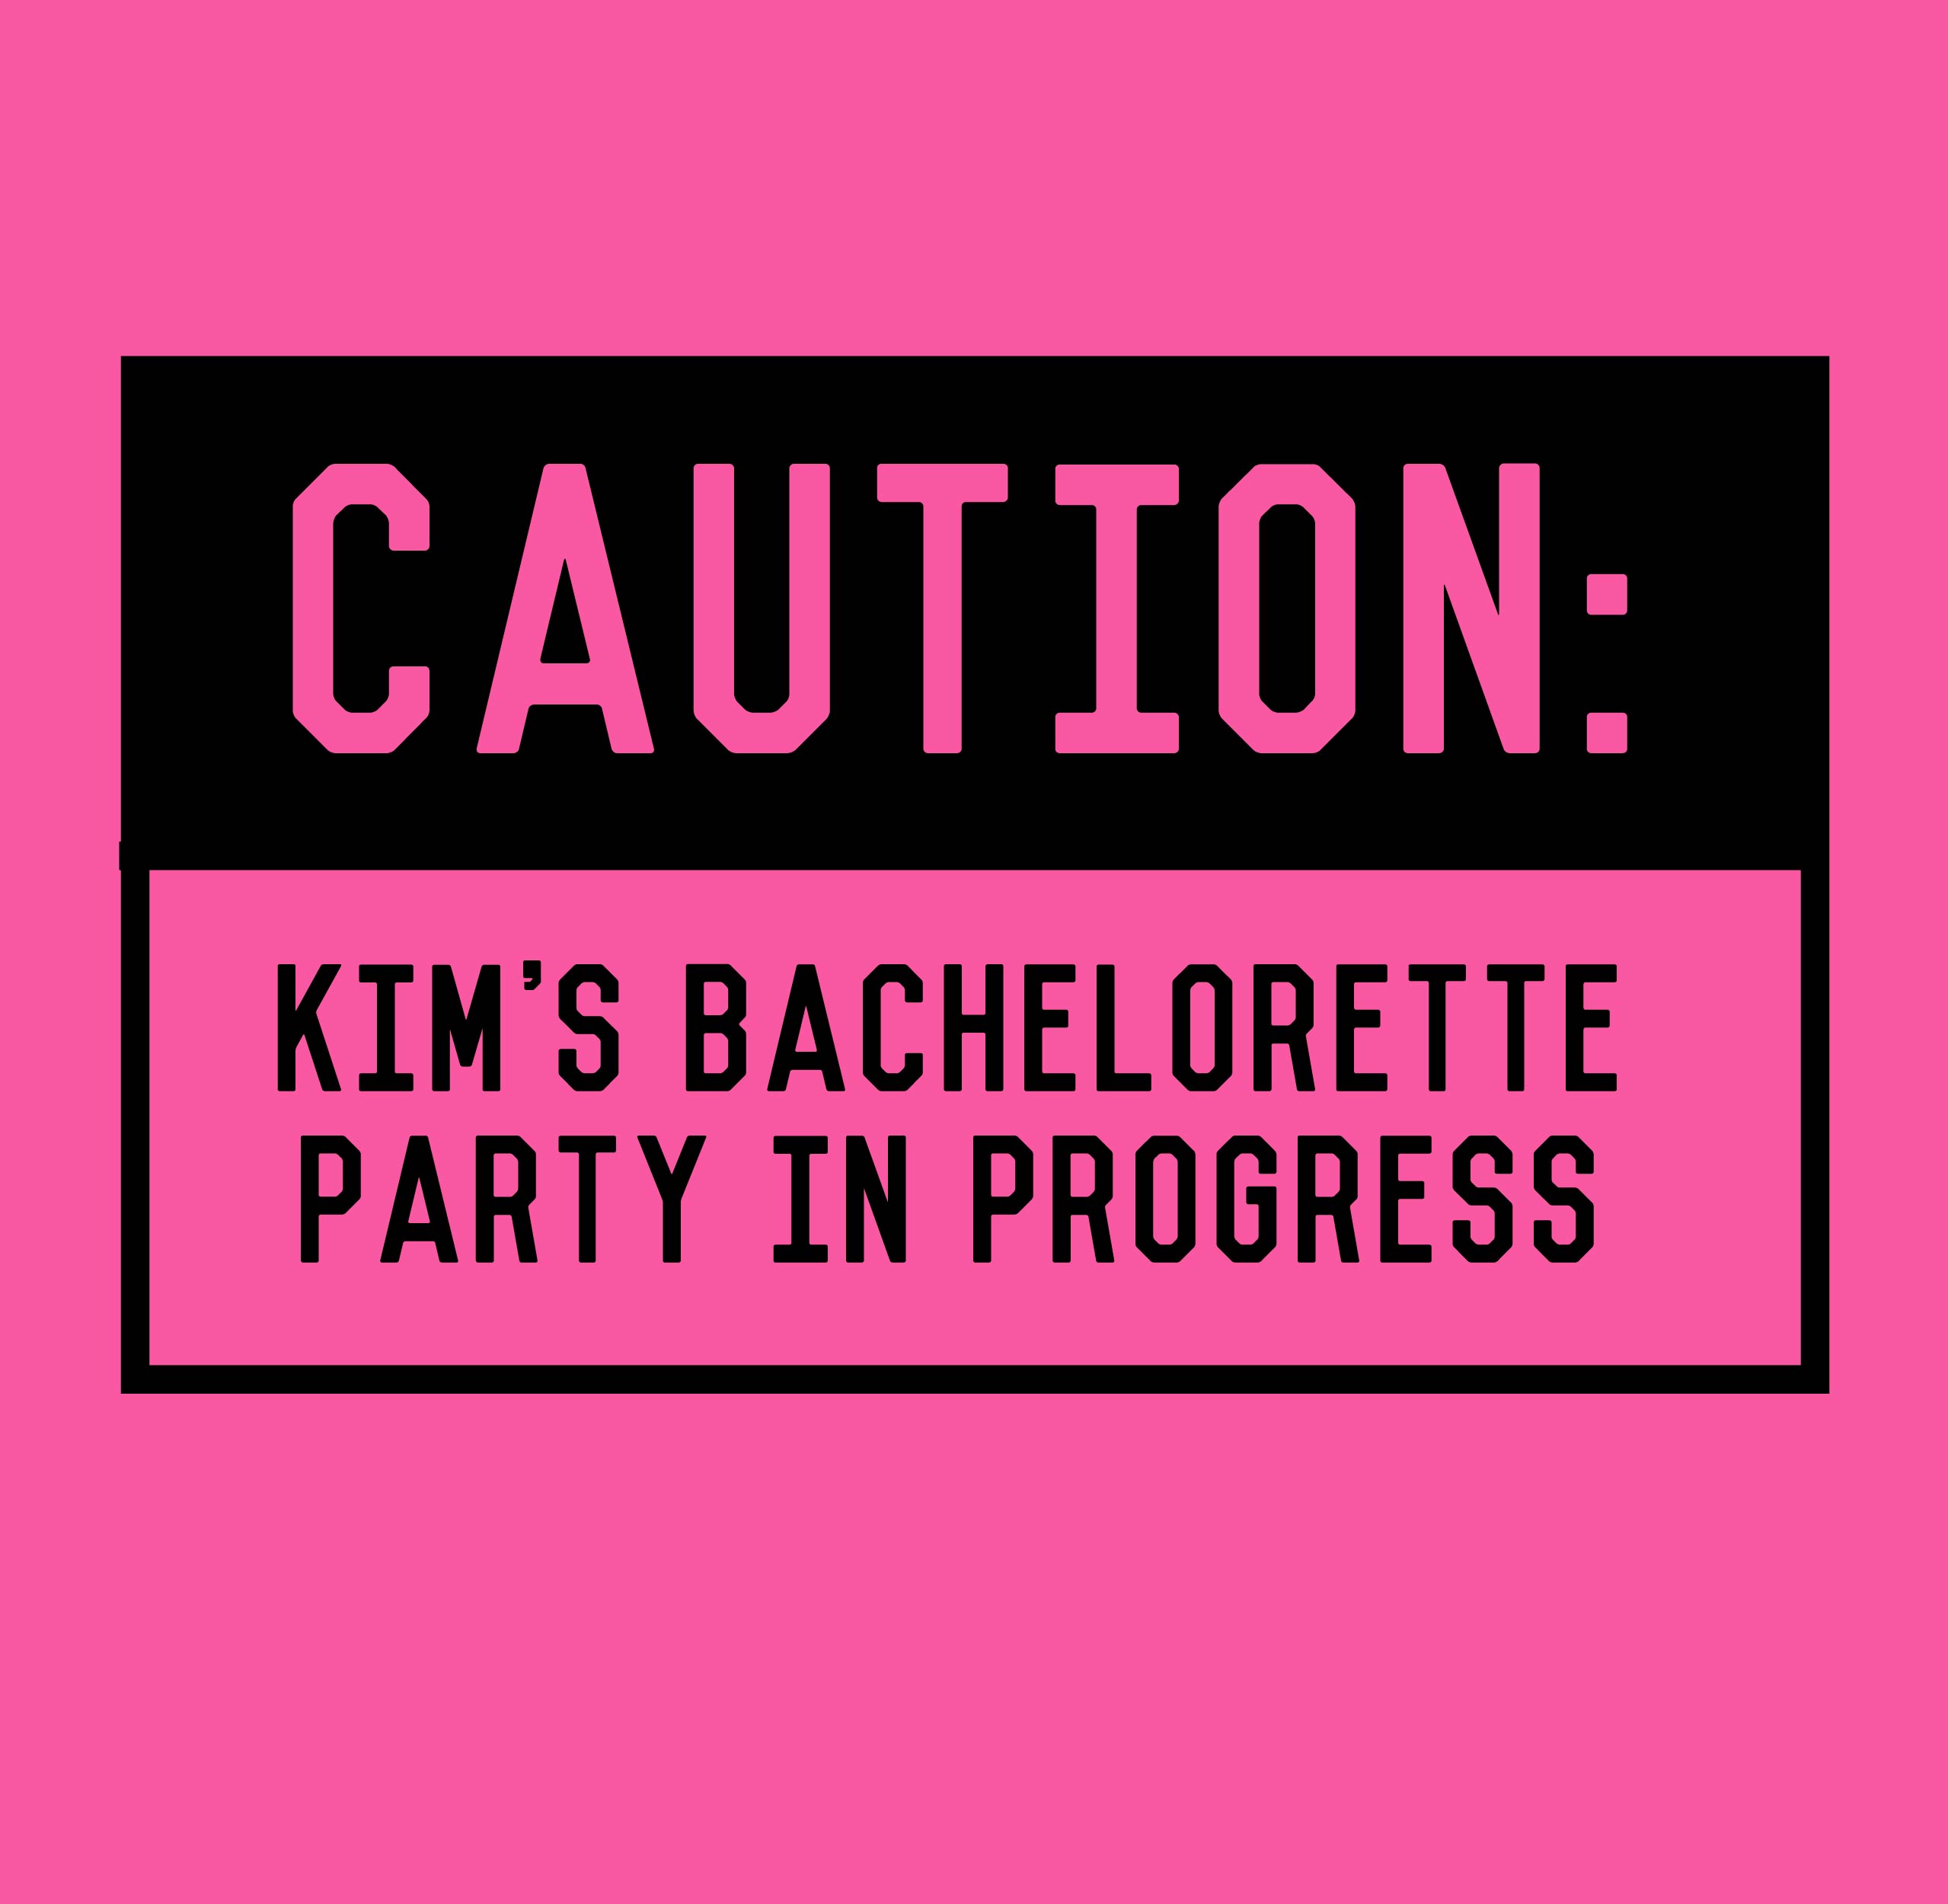 Bachelorette Party Funny Quotes. QuotesGram